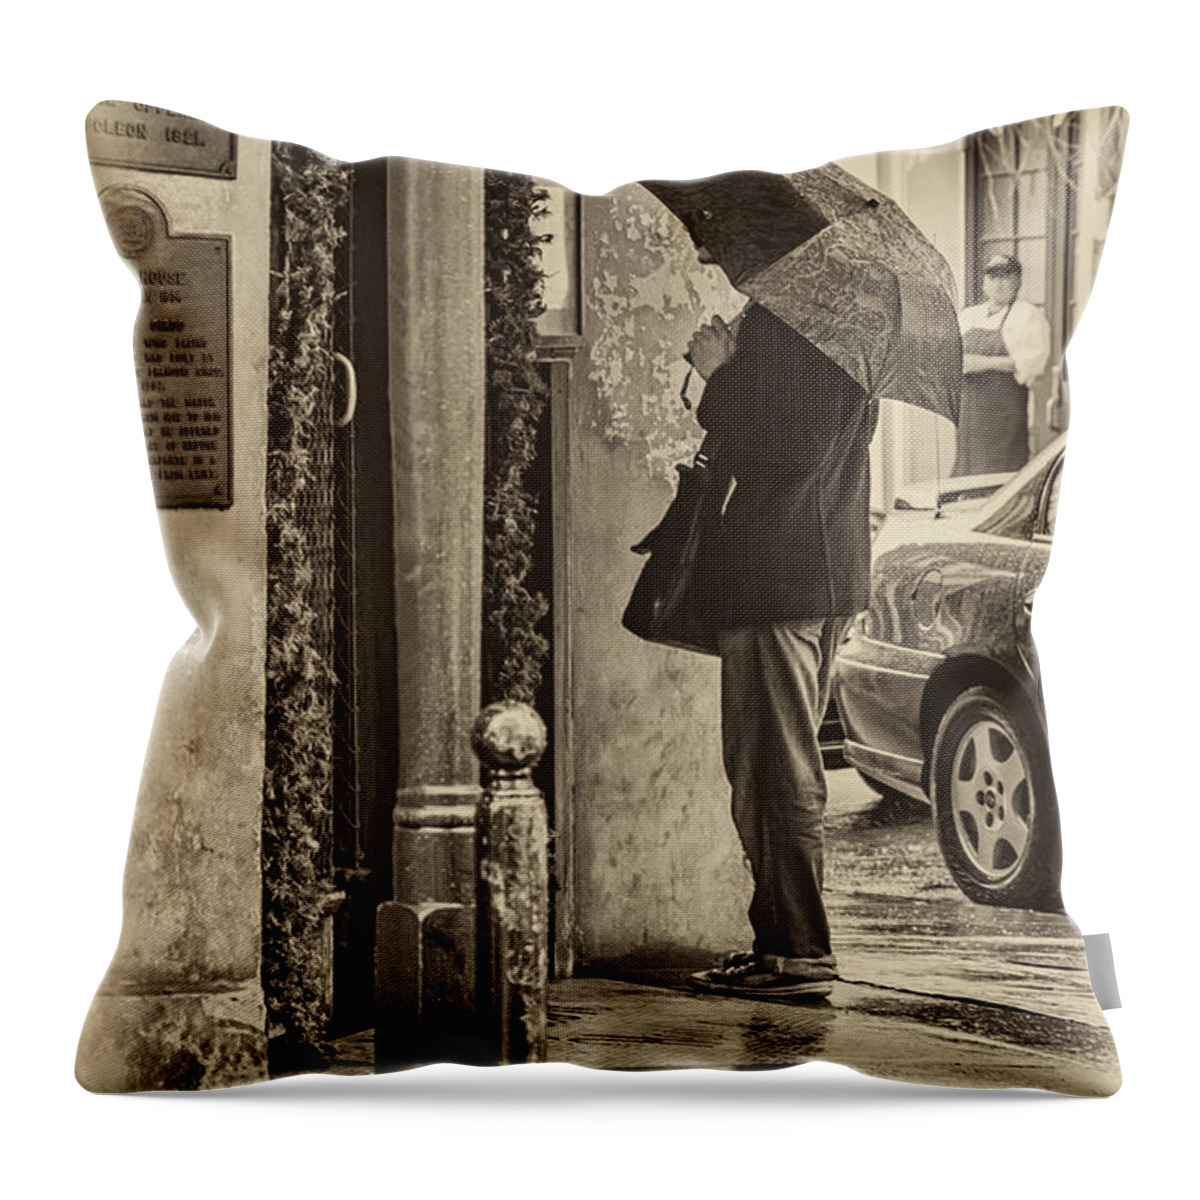 Umbrella Throw Pillow featuring the photograph Rainy Day Menu Reading - Monochrome by Kathleen K Parker